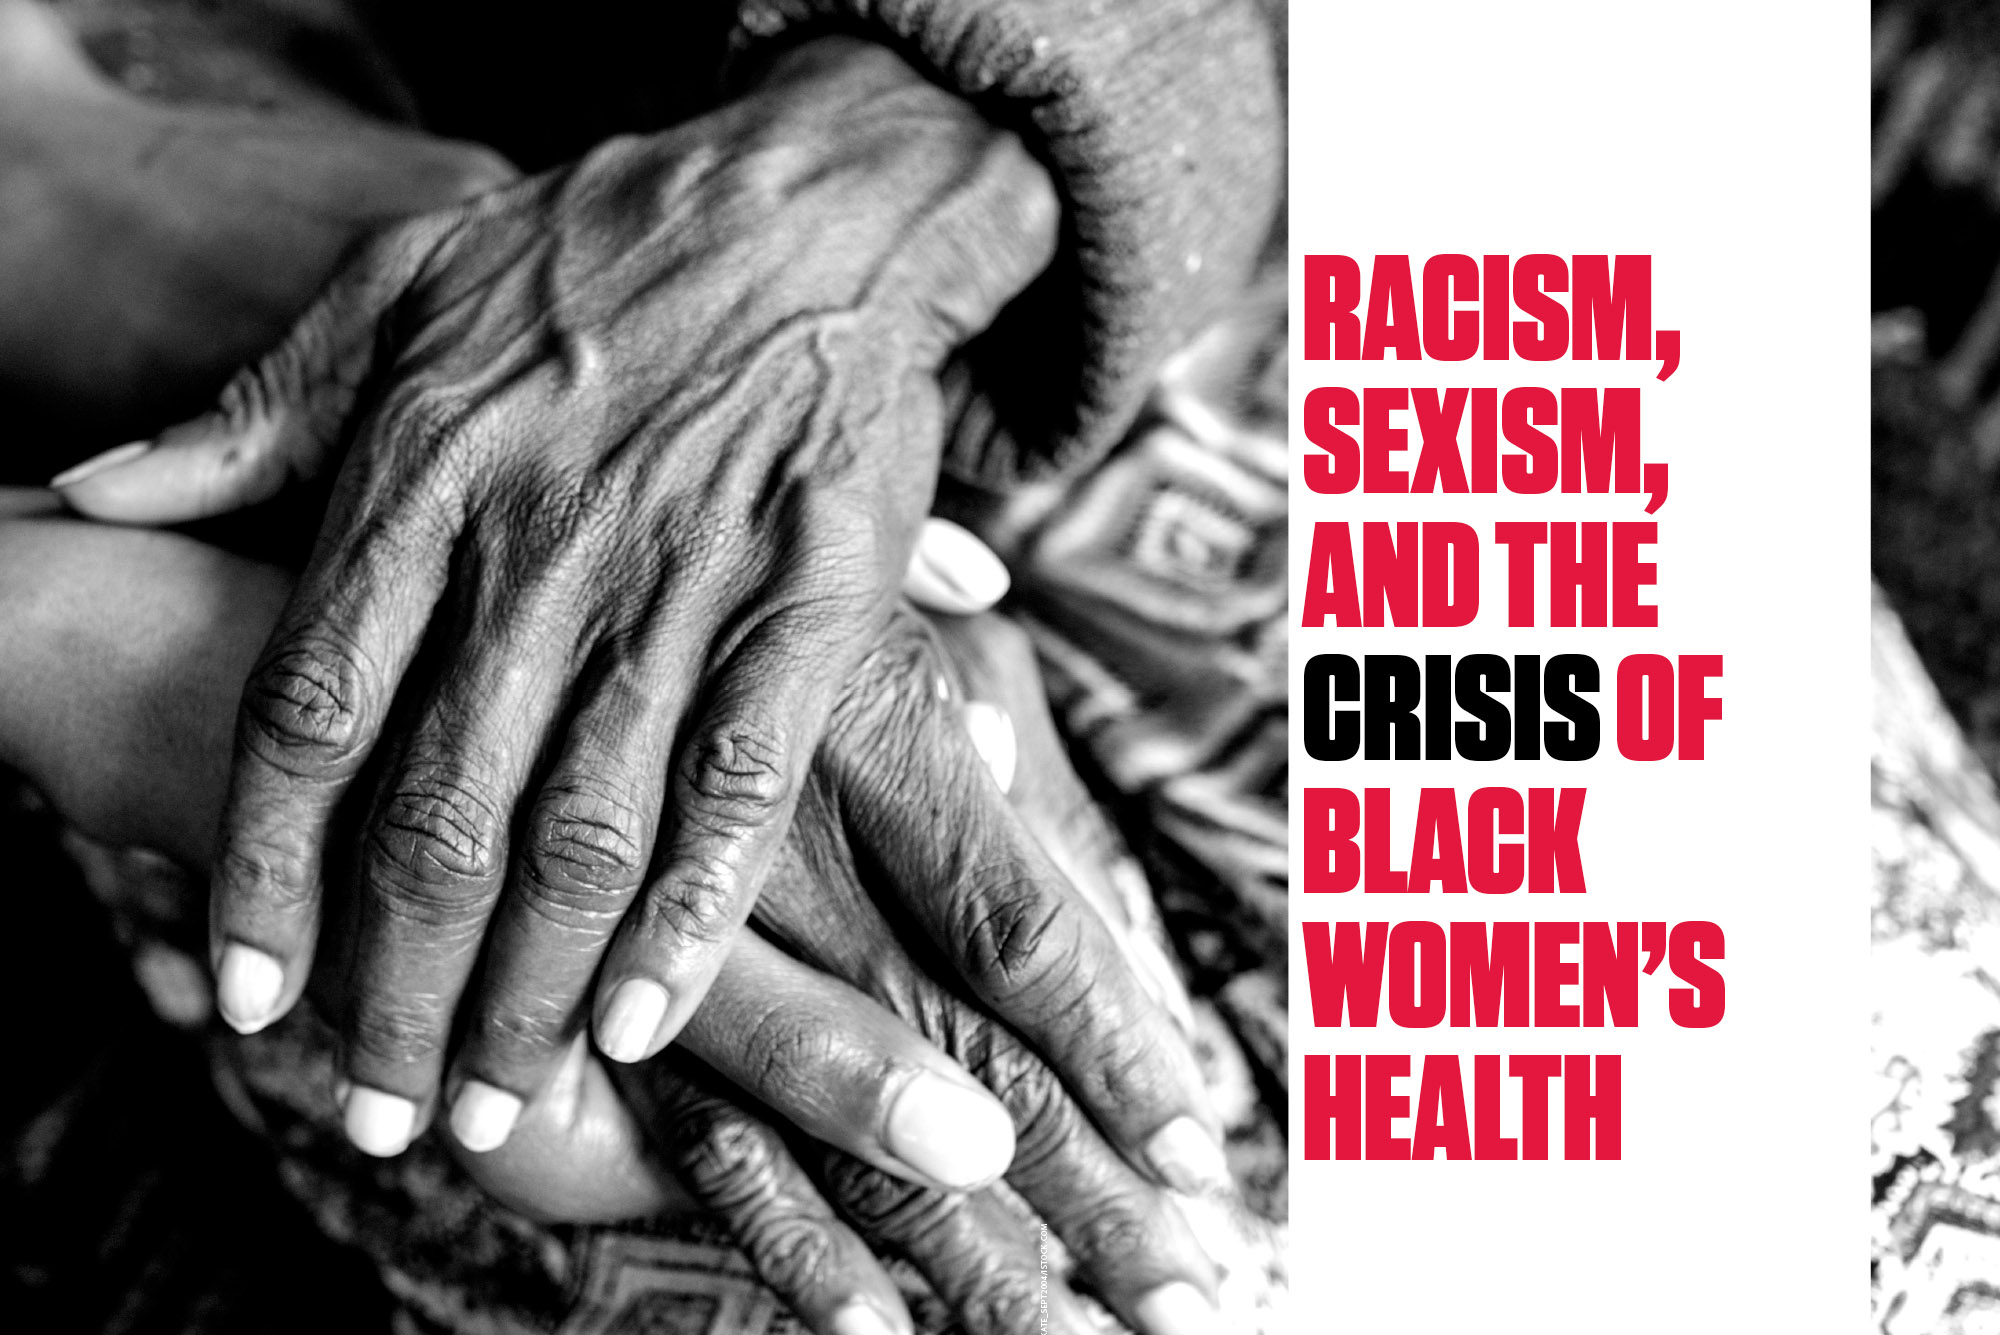 Racism, Sexism, and The Crisis of Black Women's Health